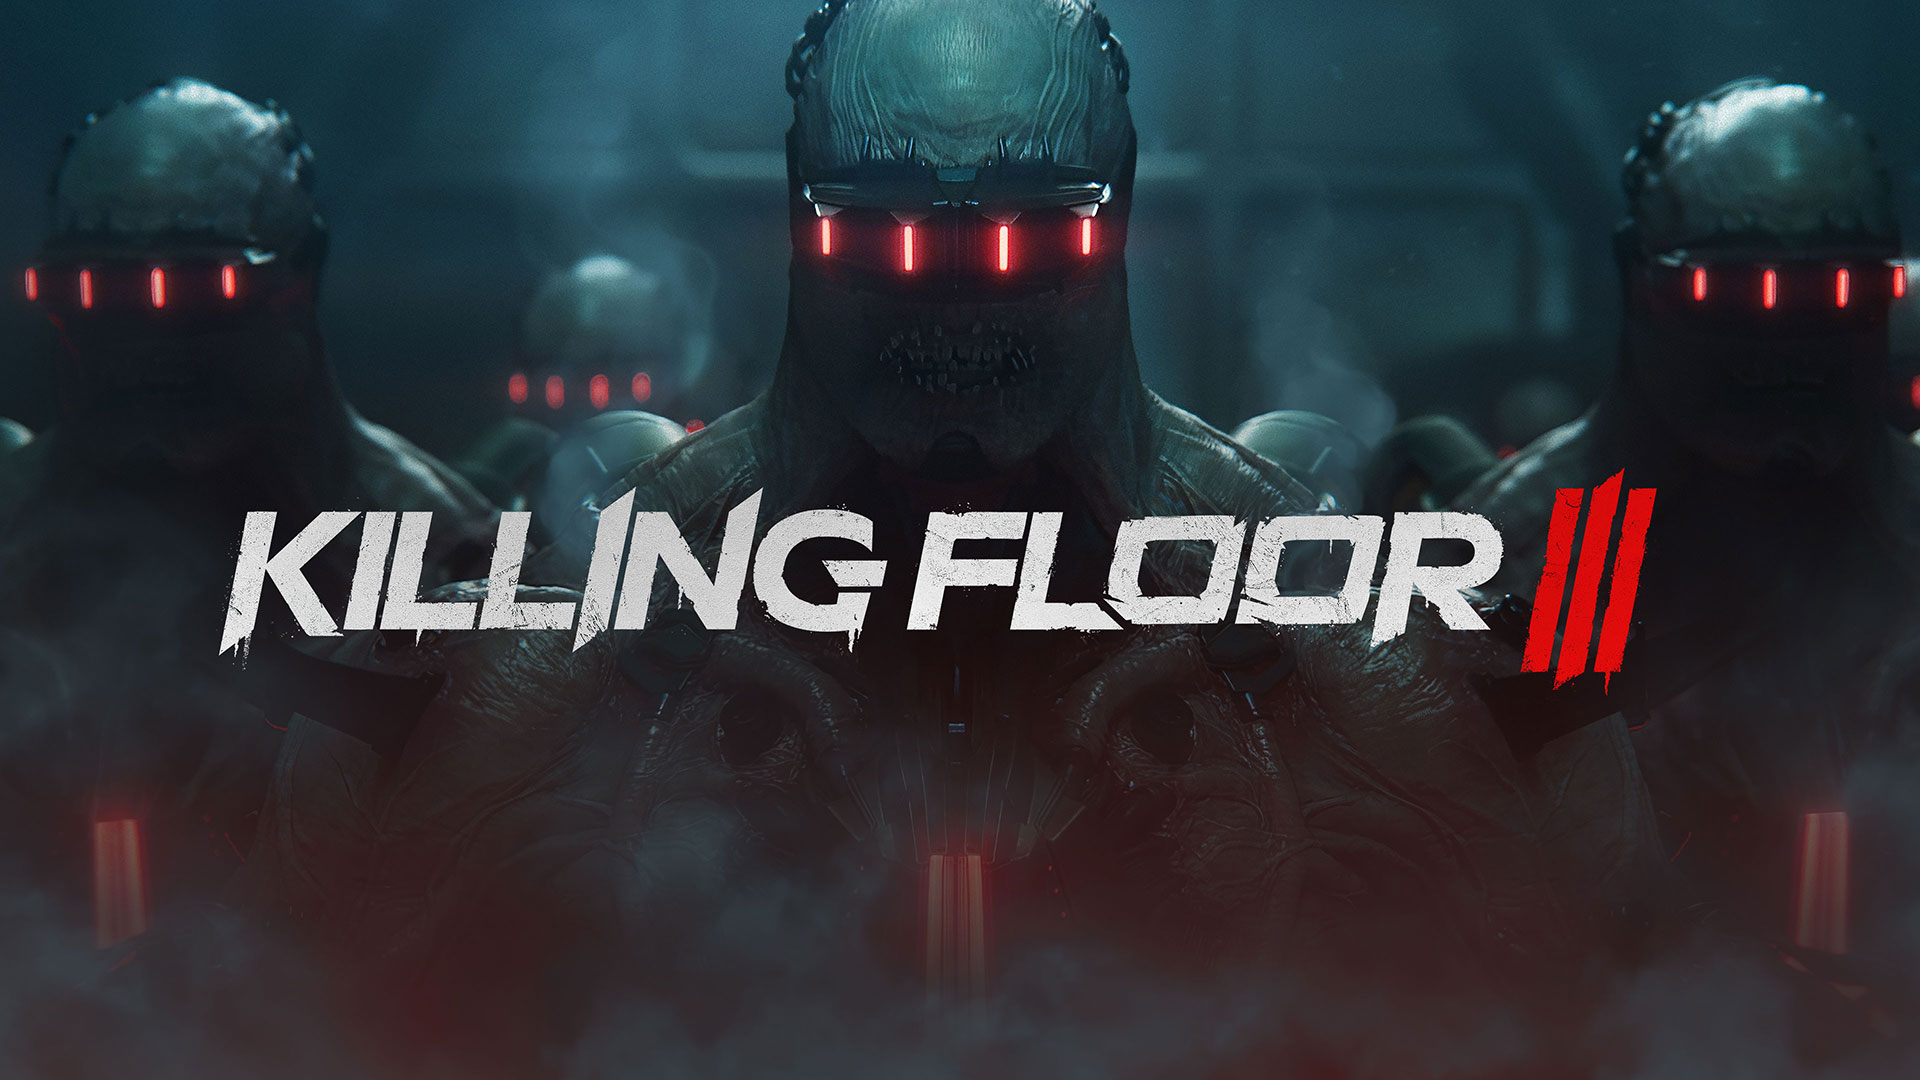 Killing Floor 3 has been officially announced at Gamescom Opening Night Live